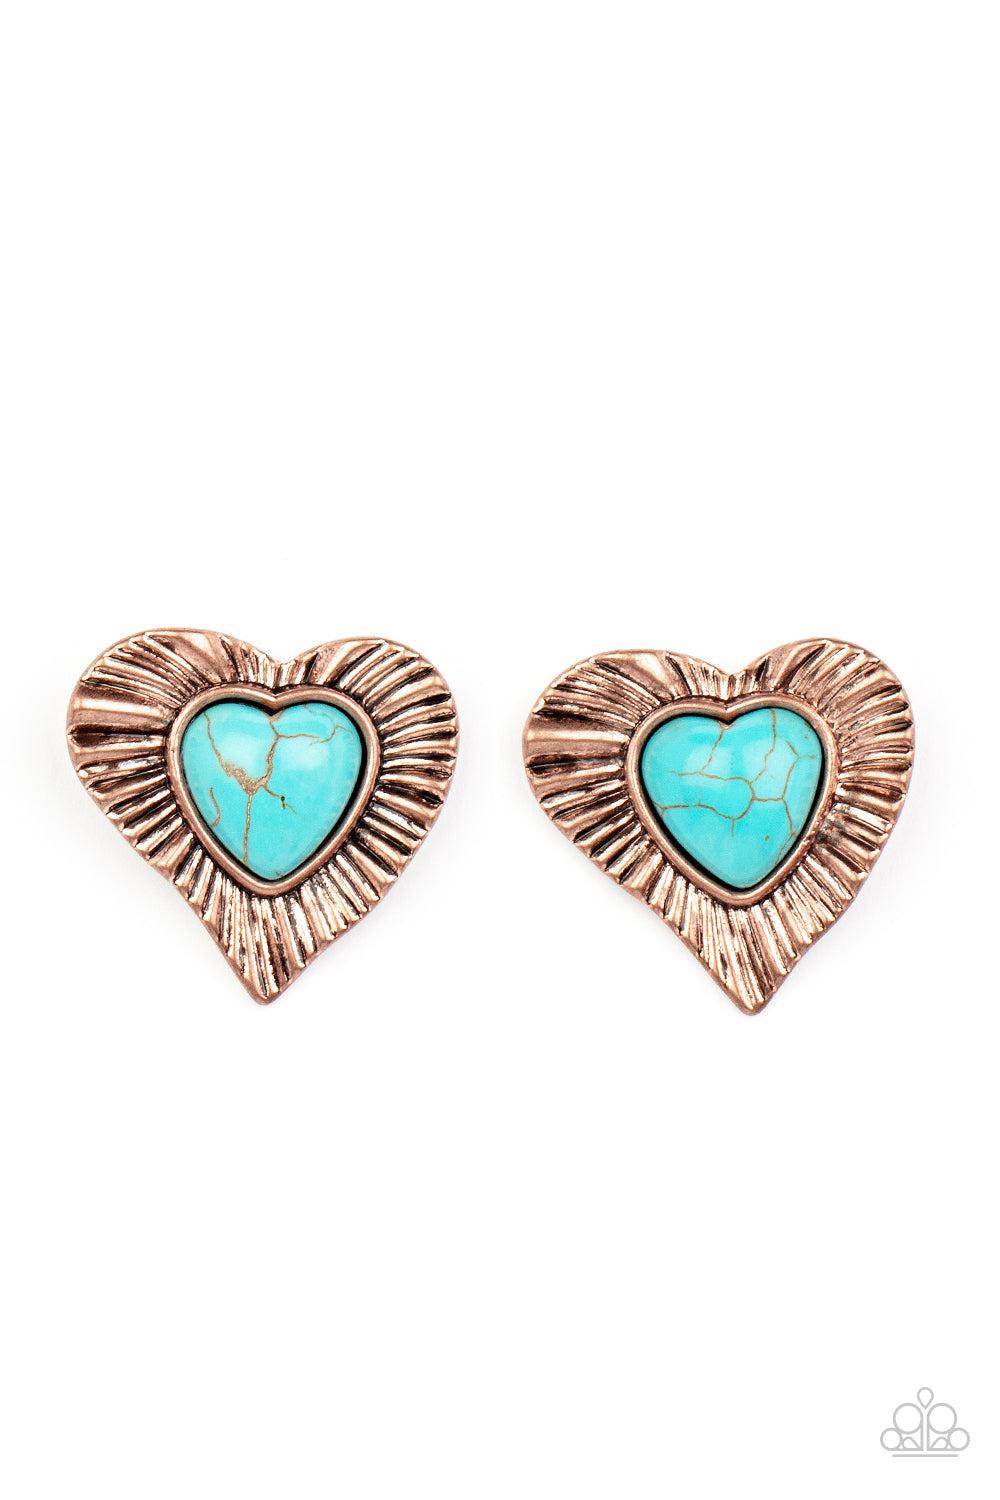 Rustic Romance Copper &amp; Turquoise Heart Earrings - Paparazzi Accessories- lightbox - CarasShop.com - $5 Jewelry by Cara Jewels